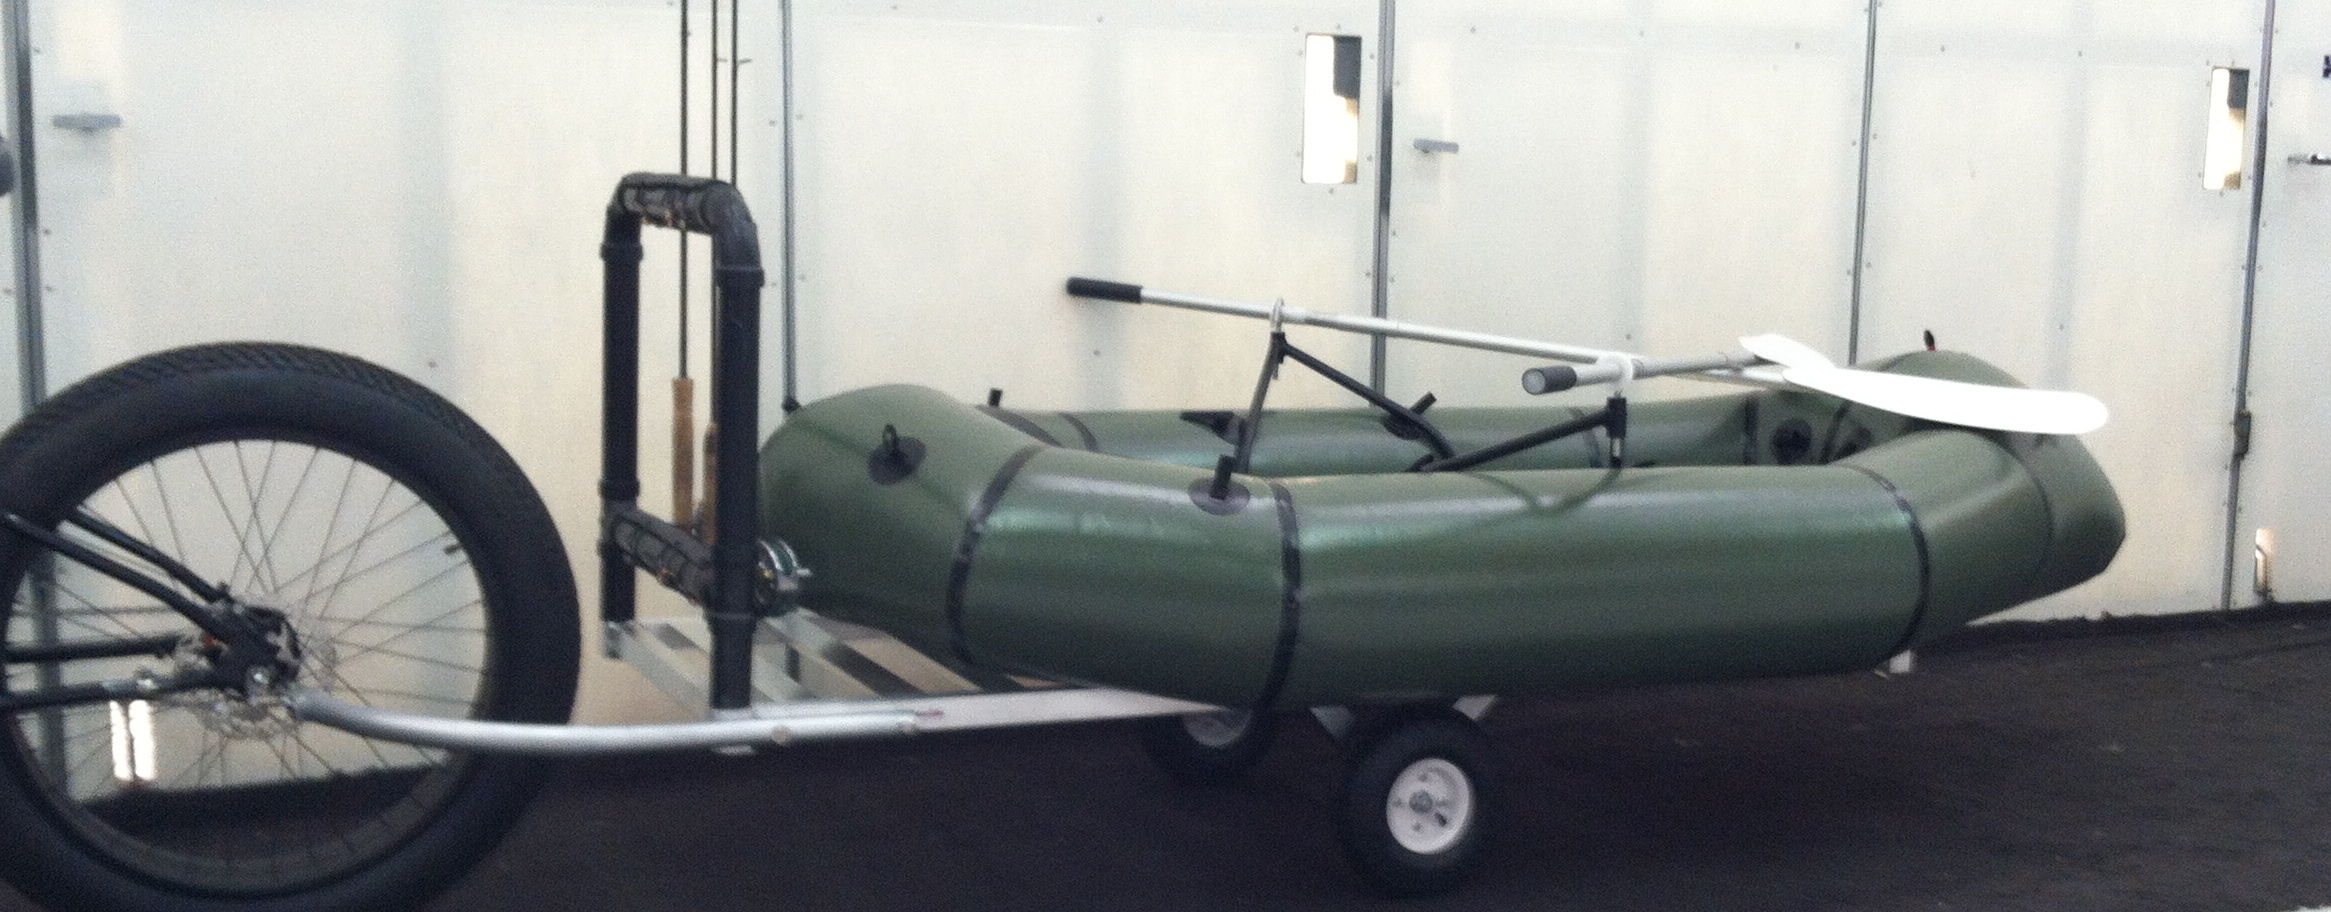 Bicycle Cargo Trailers for Fishing Gear